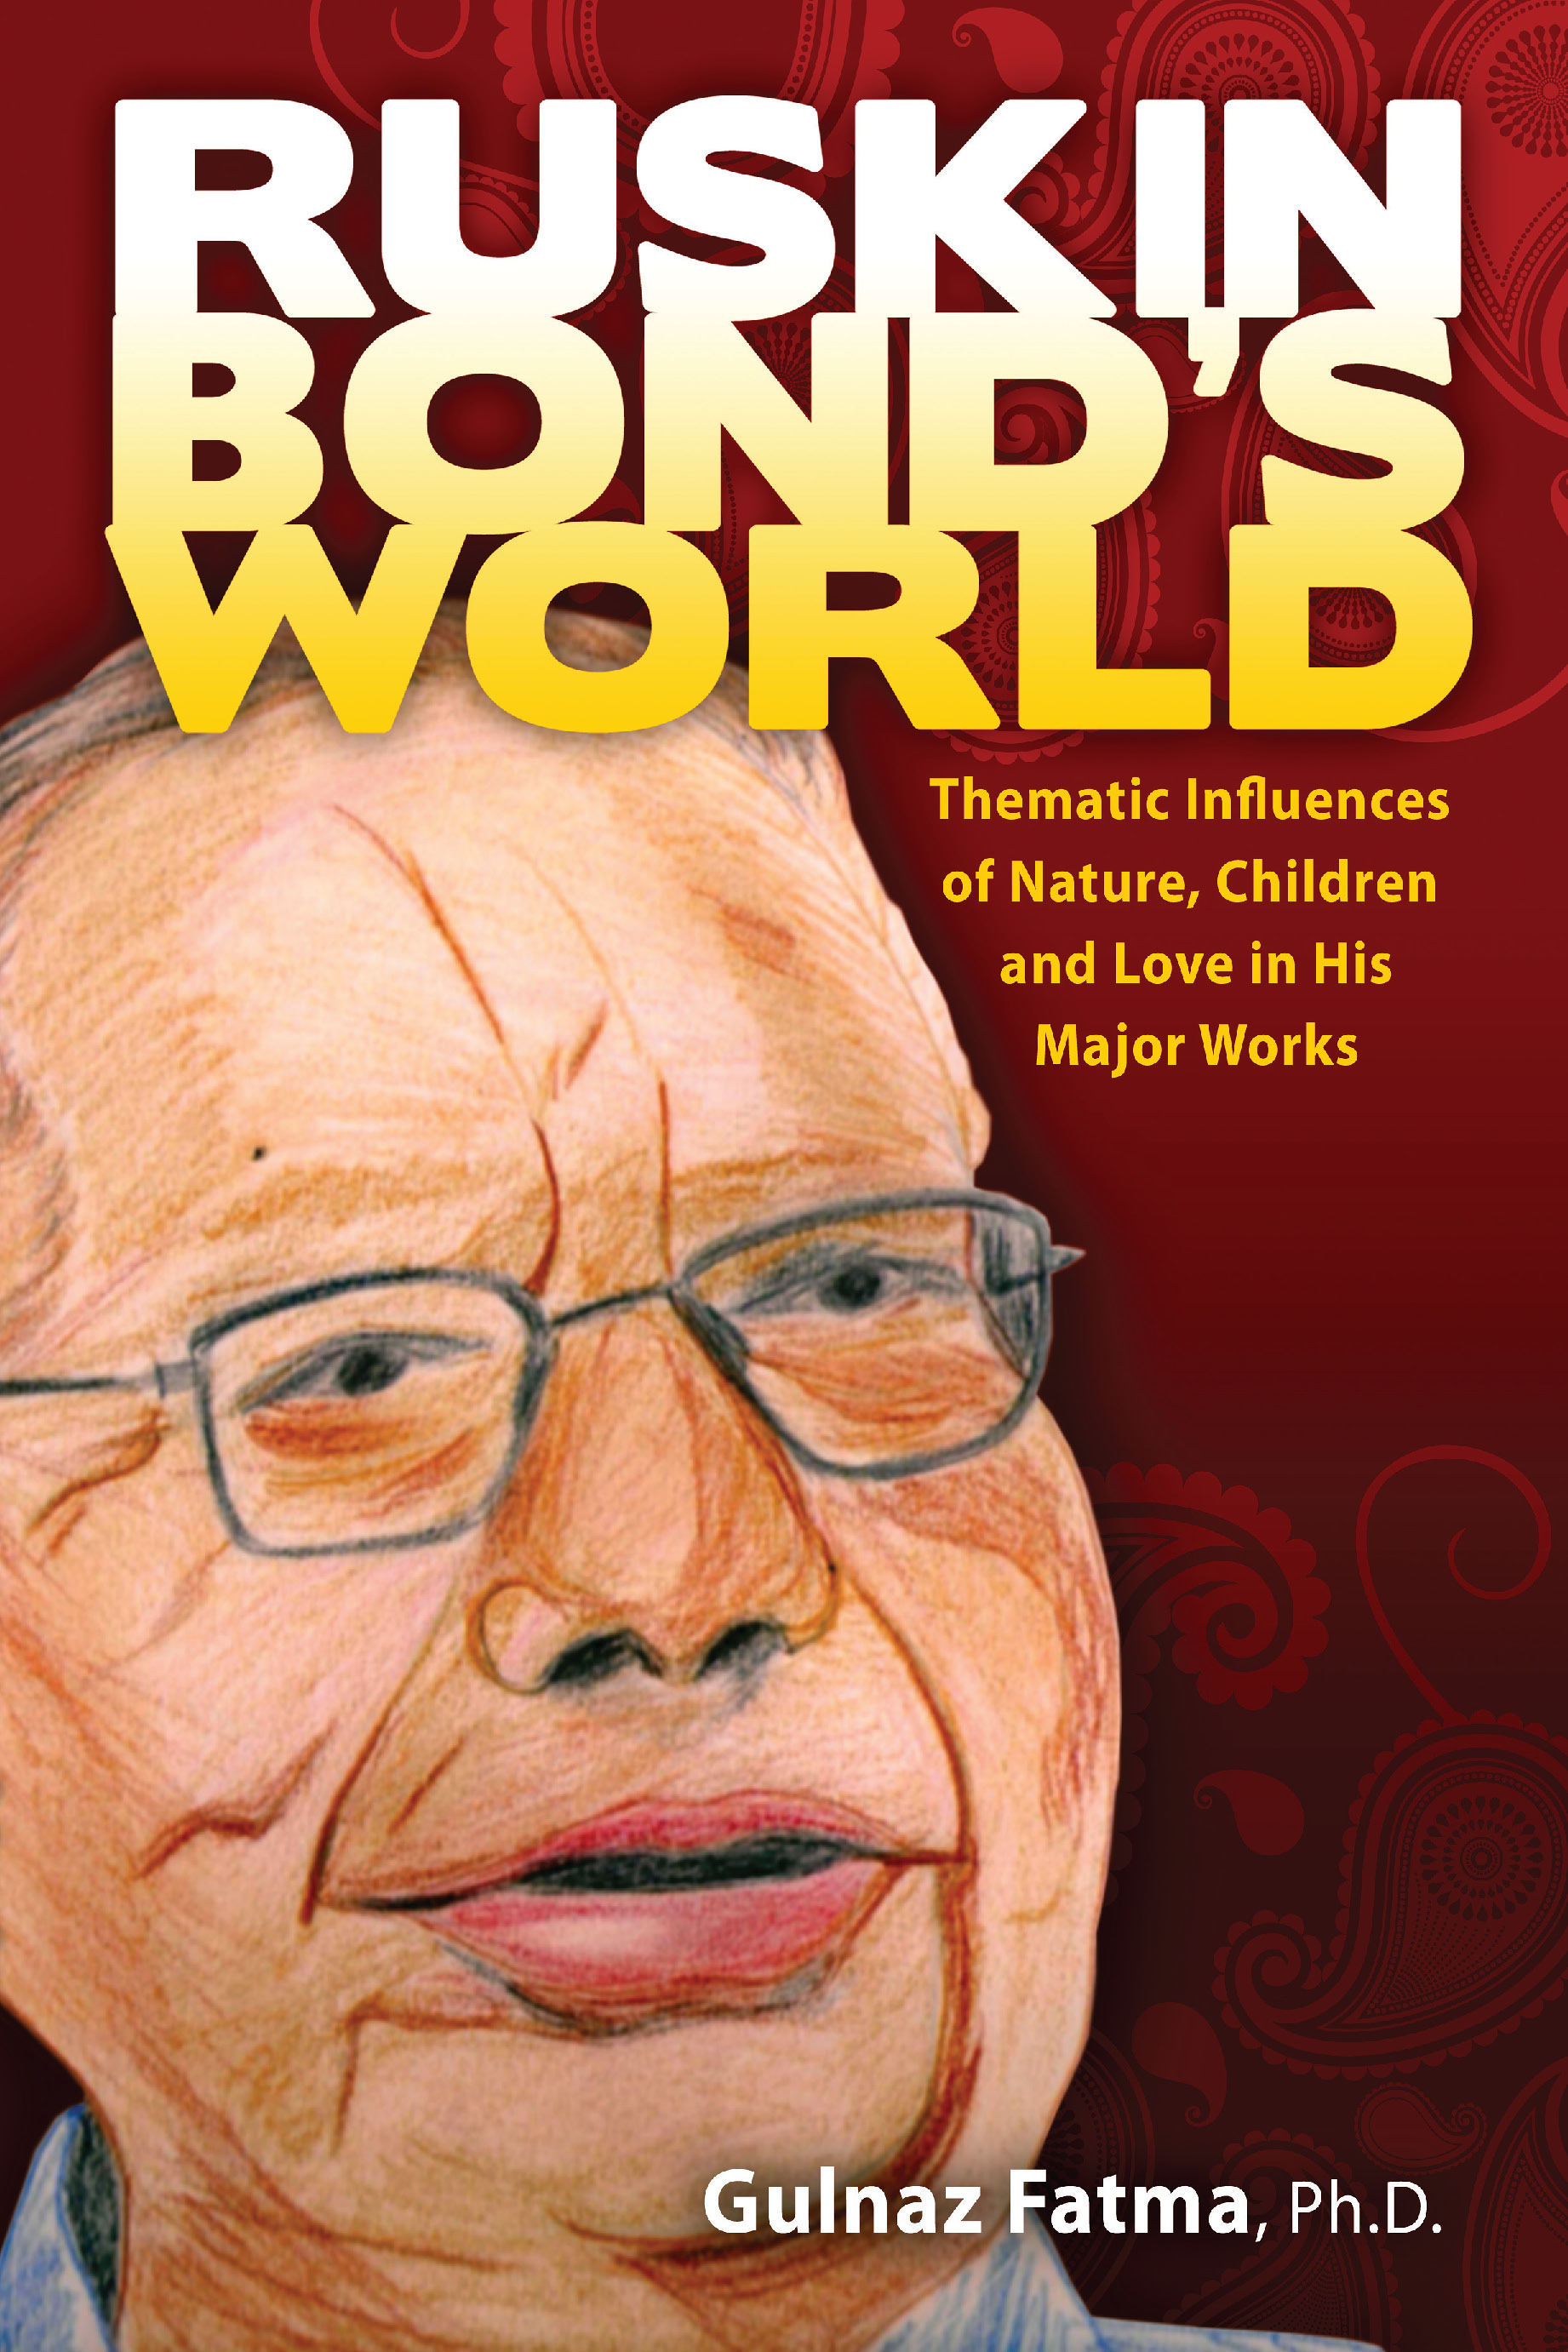 Ruskin Bond's World: Thematic Influences of Nature, Children, and Love in His Major Works